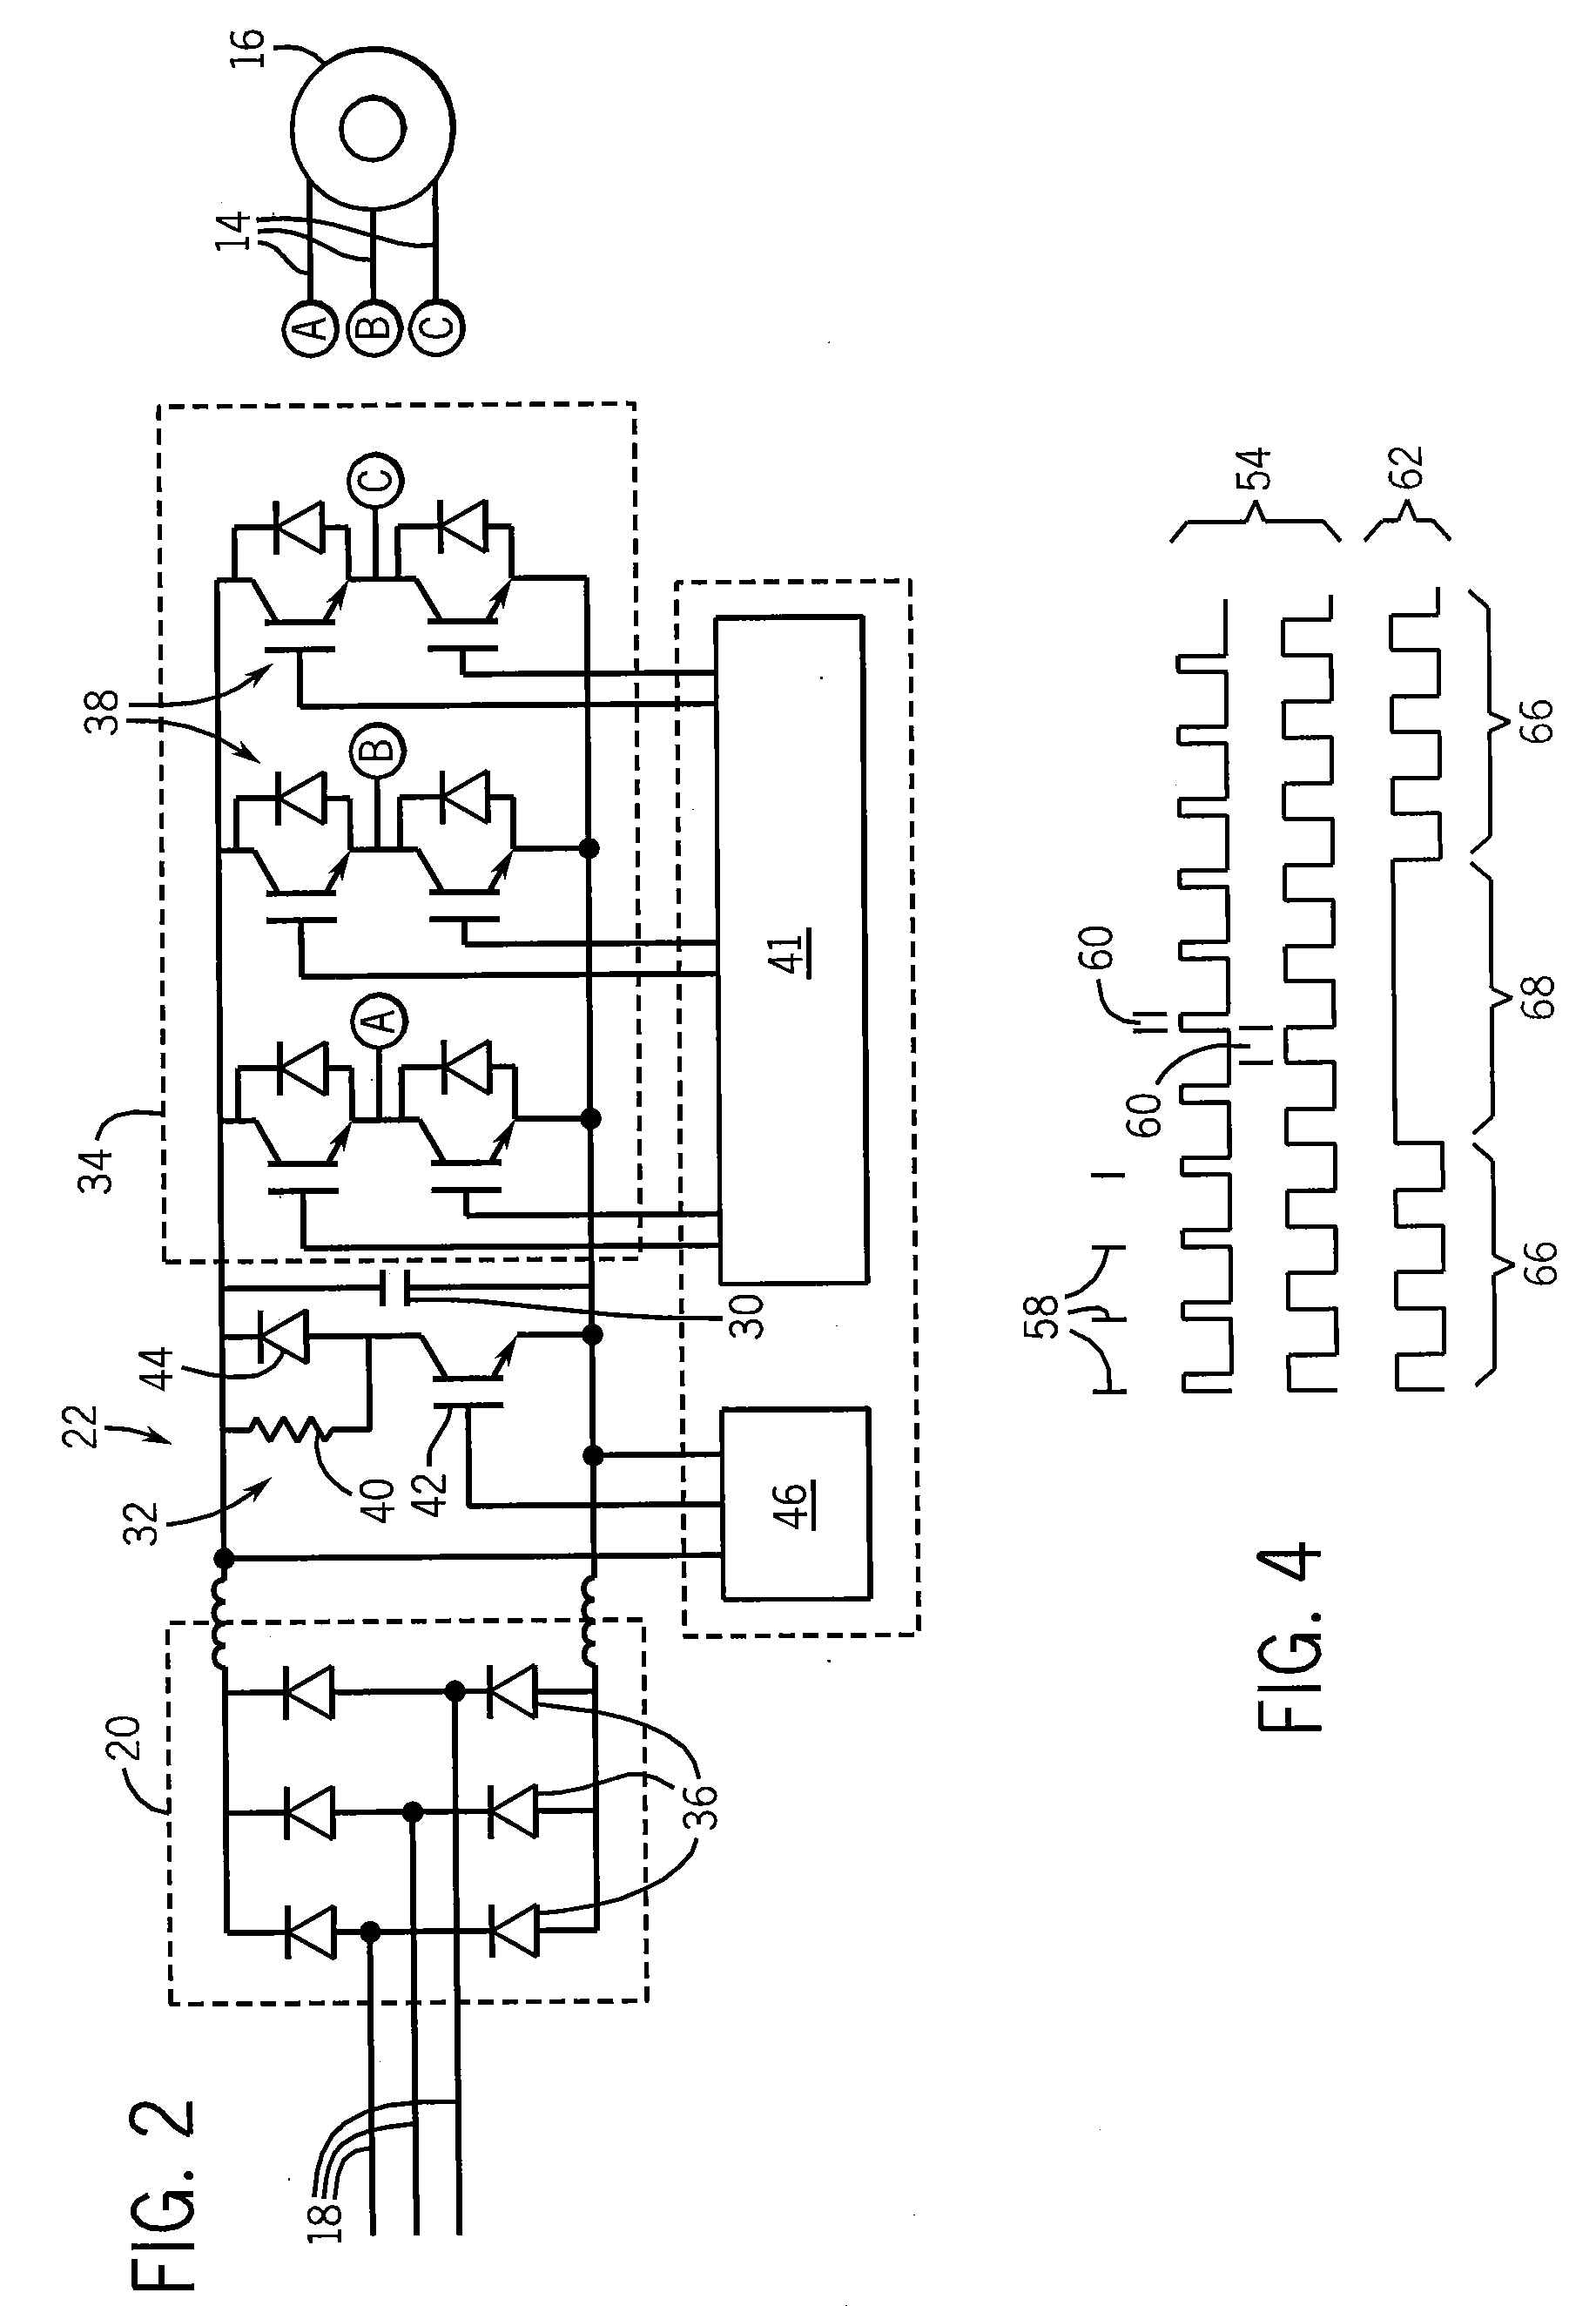 Electric motor drive employing hybrid, hysteretic/pulse-width-modulated dynamic braking